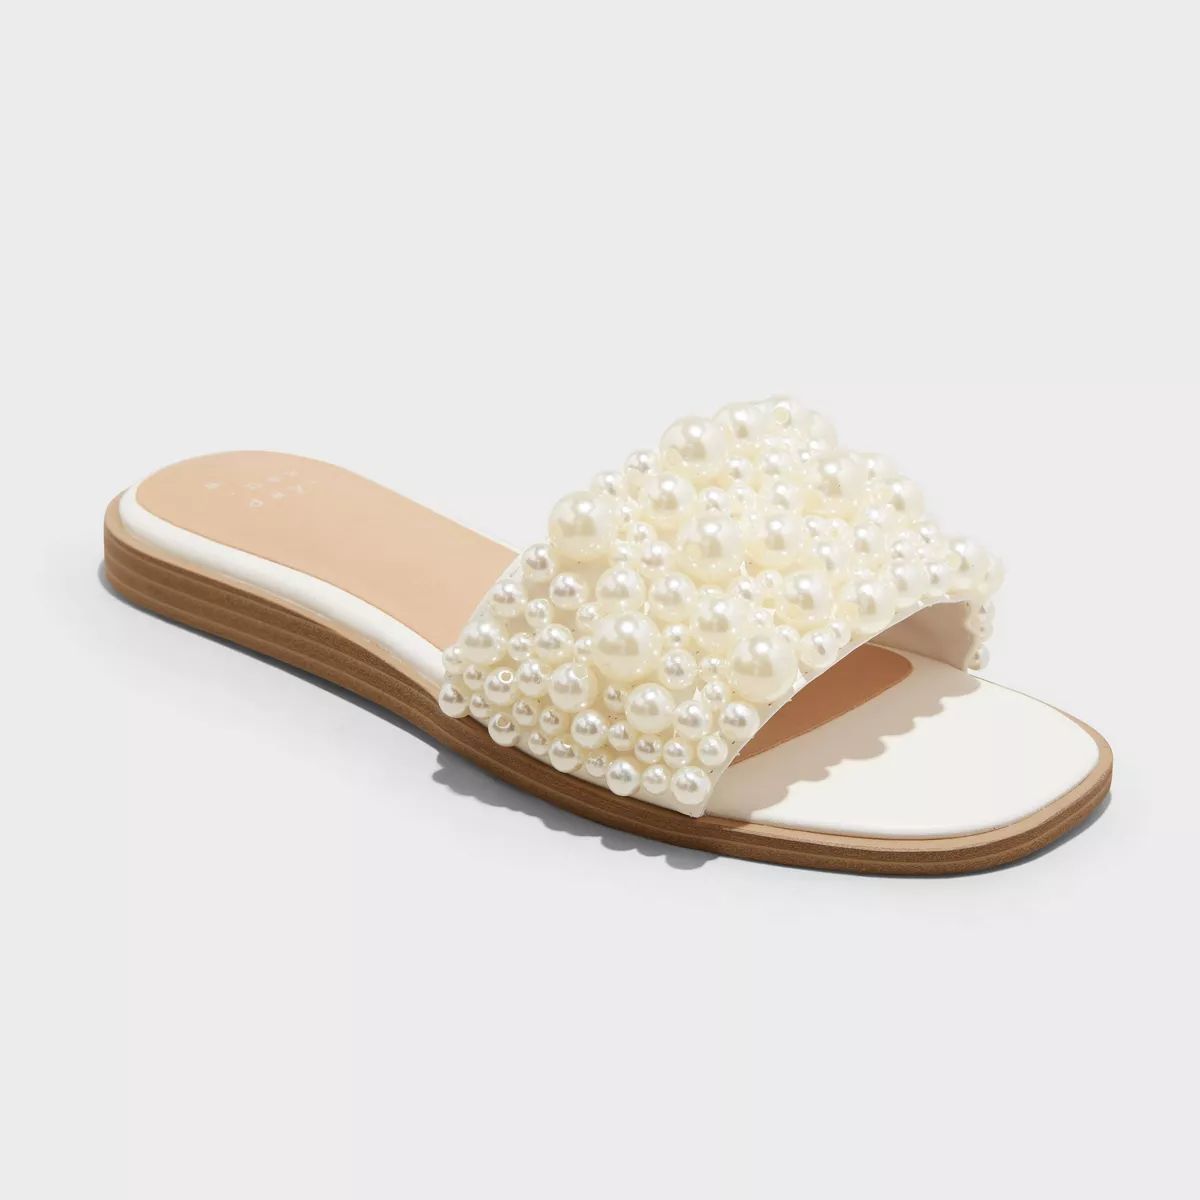 Women's Jasmine Pearl Slide Sandals with Memory Foam Insole - A New Day™ Cream 8.5 | Target